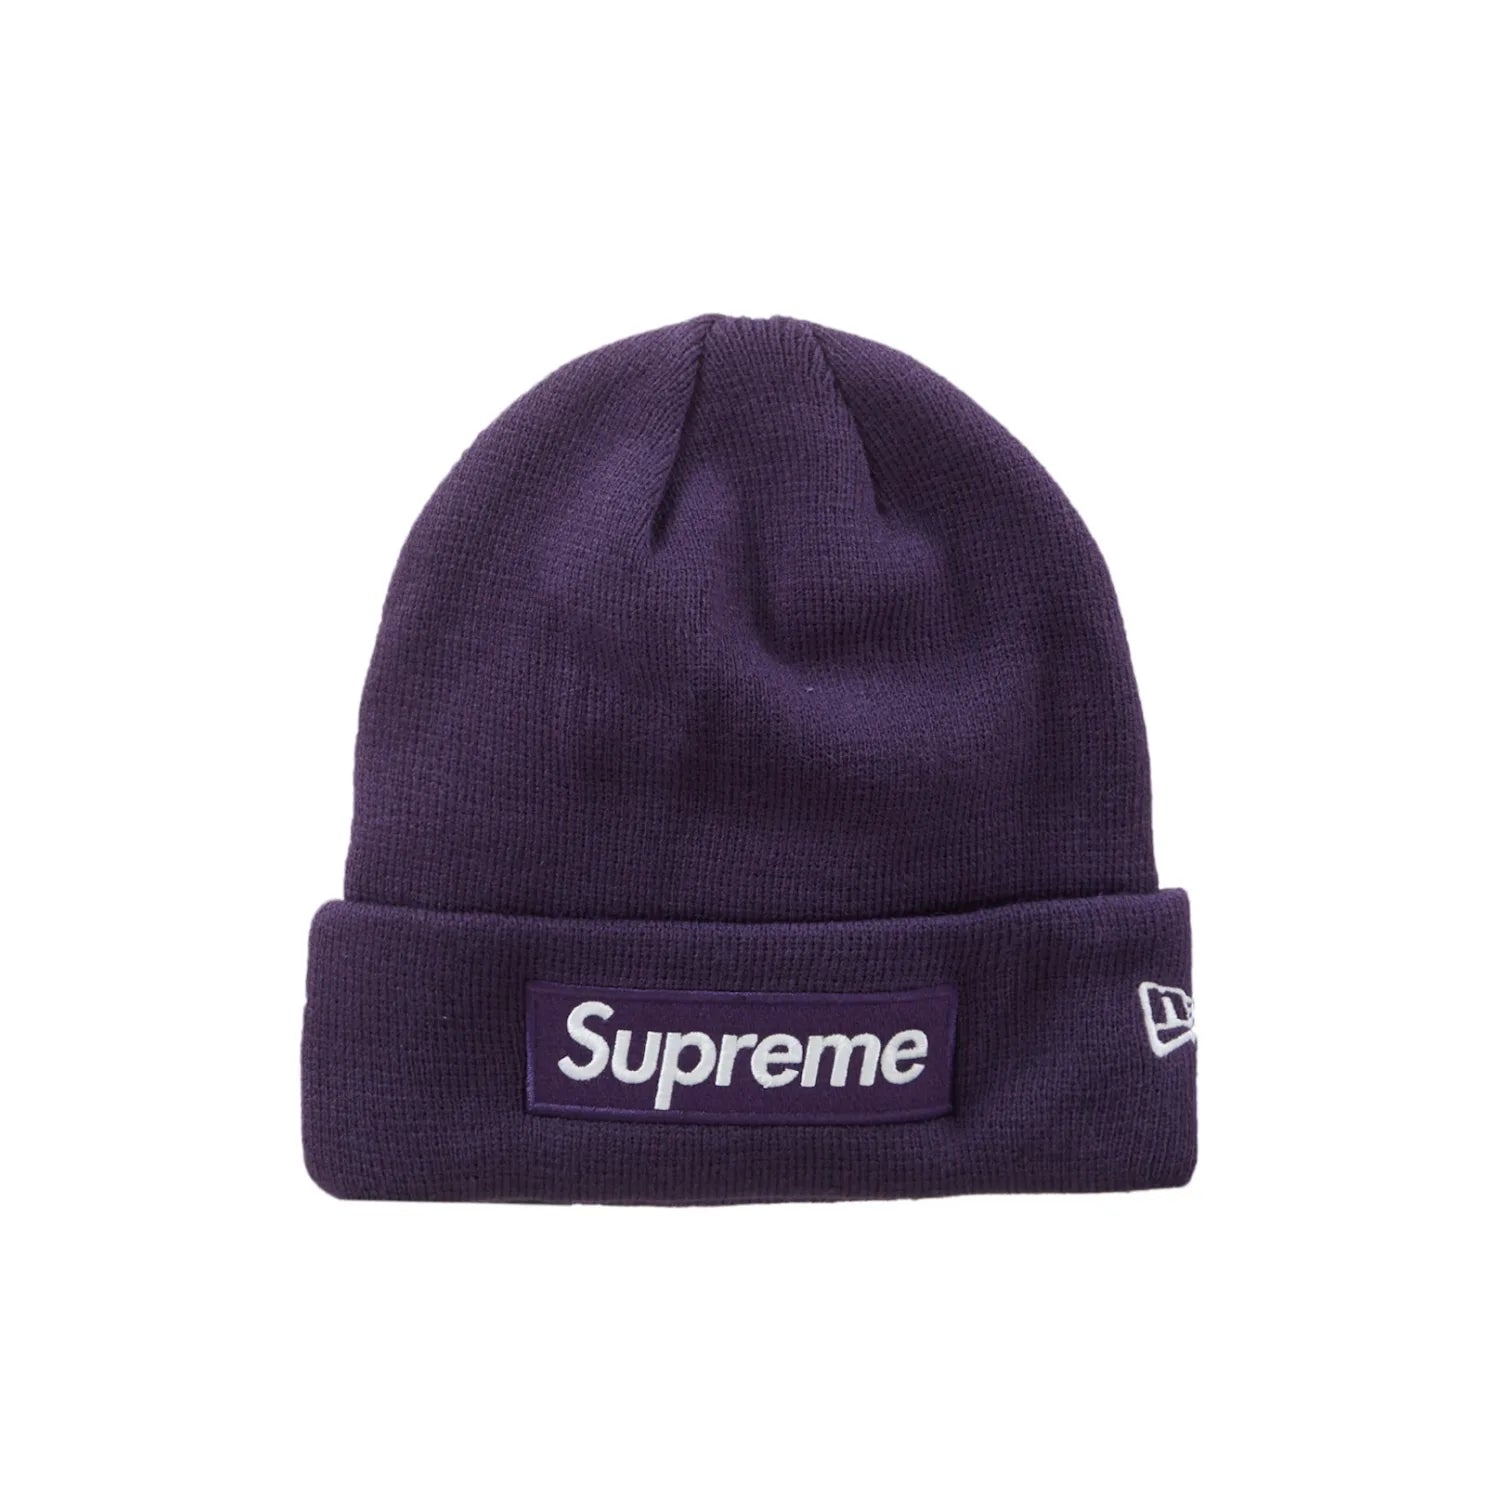 Supreme New Era Box Logo Beanie (FW23) Dark Purple - Image 1 - Only at www.BallersClubKickz.com - Stay warm in style with the iconic Supreme New Era Box Logo Beanie (FW23). Sleek dark purple color with the iconic Box Logo embroidered across the front. Show off your street style this season with this stylish beanie!